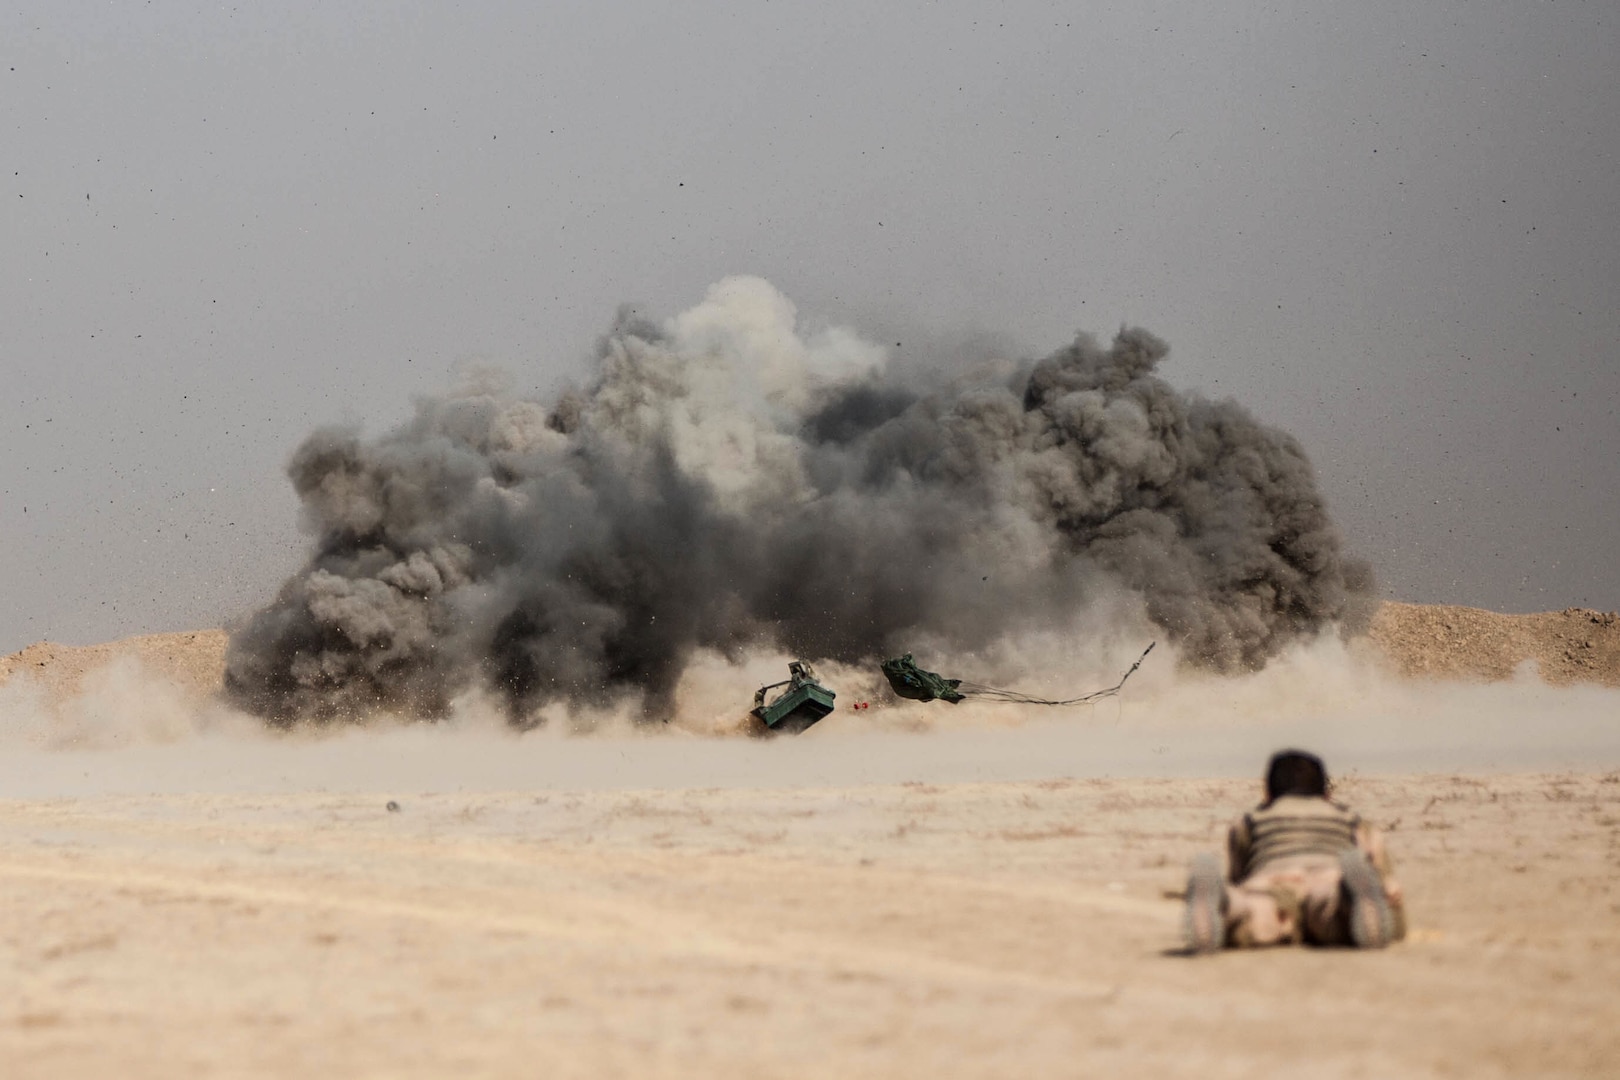 An Iraqi security forces soldier detonates an anti-personnel obstacle breaching systems during the combat engineer task training course at the Besmaya Range Complex, Iraq, Nov. 9, 2016. Camp Besmaya is one of four Combined Joint Task Force – Operation Inherent Resolve (CJTF-OIR) building partner capacity locations dedicated to training Iraqi security forces. Combined Joint Task Force-Operation Inherent Resolve is a multinational effort to weaken and destroy Islamic State in Iraq and the Levant operations in the Middle East region and around the world. (U.S. Army photo by Sgt. Josephine Carlson)